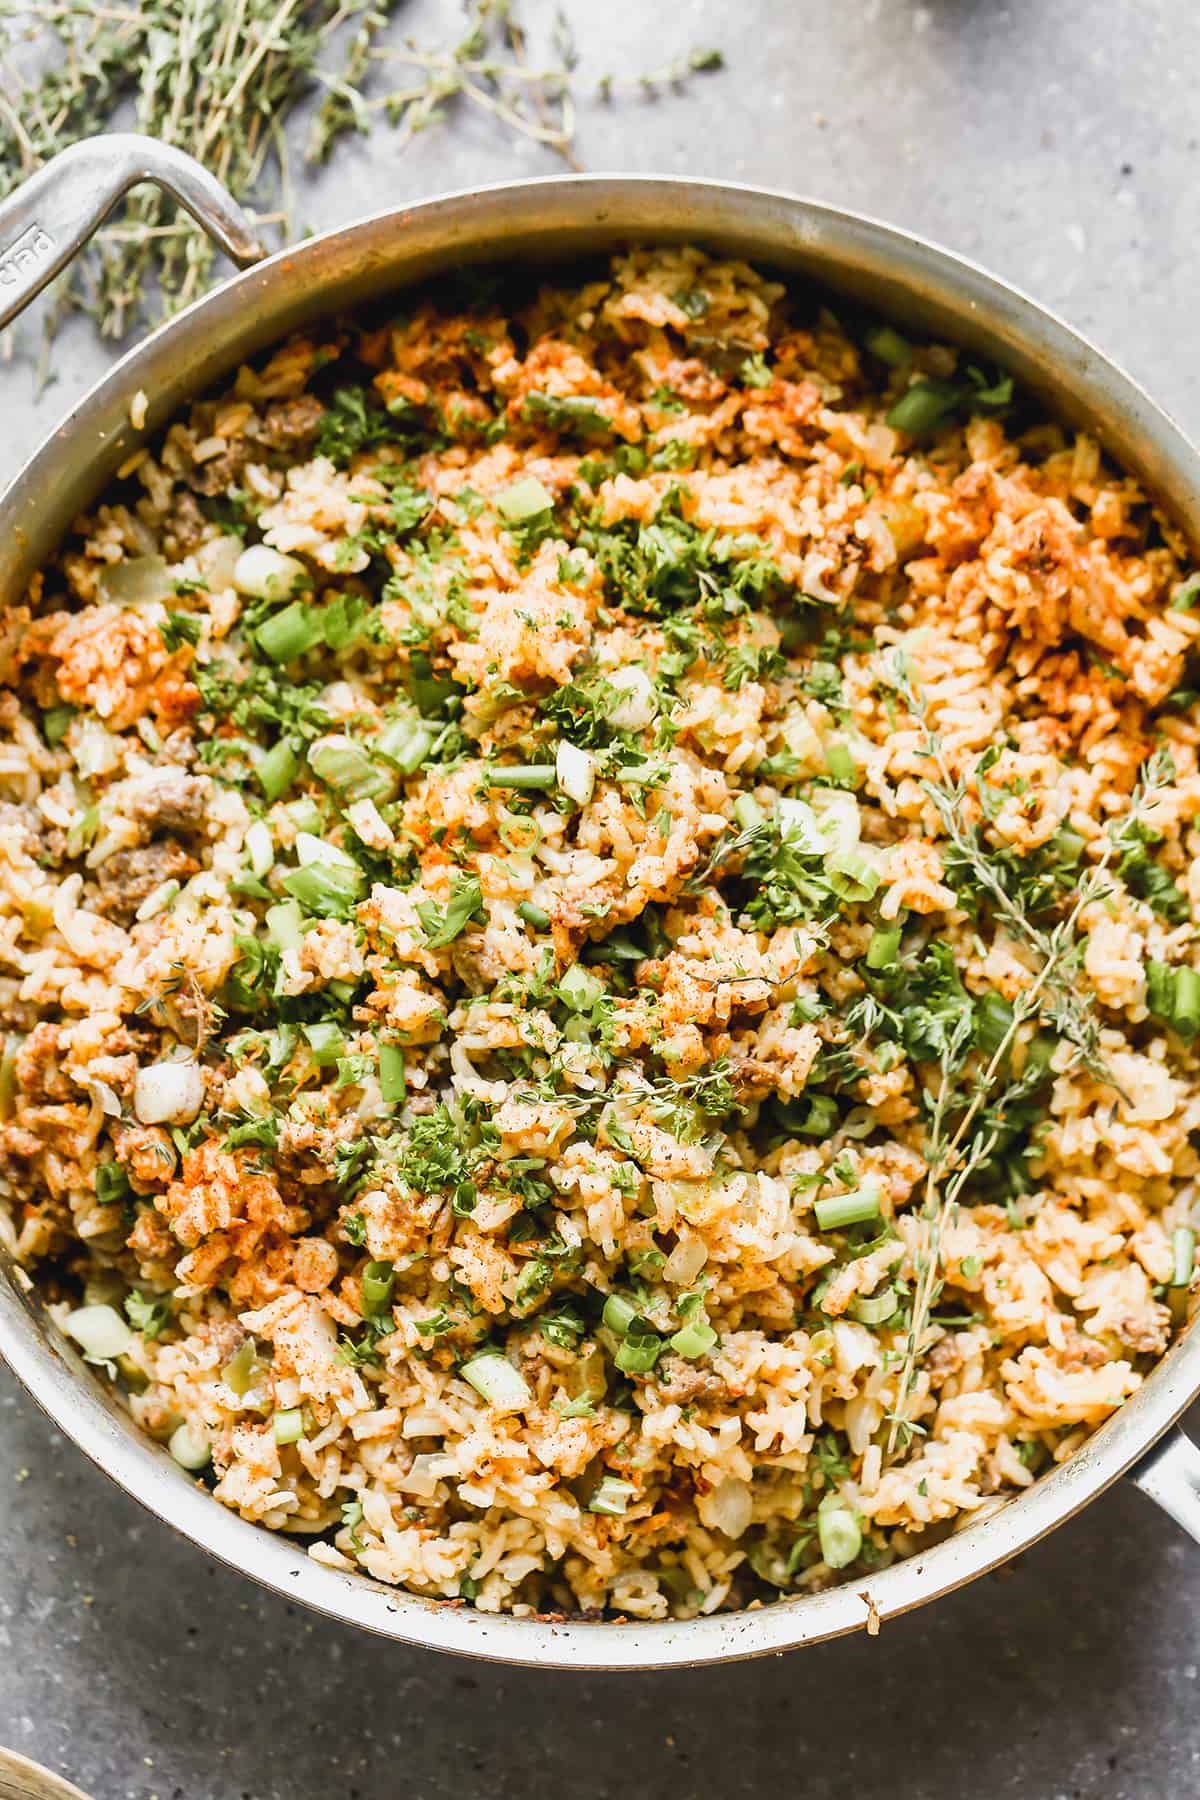 Cajun rice in a large pan, garnished with green onion and parsley.